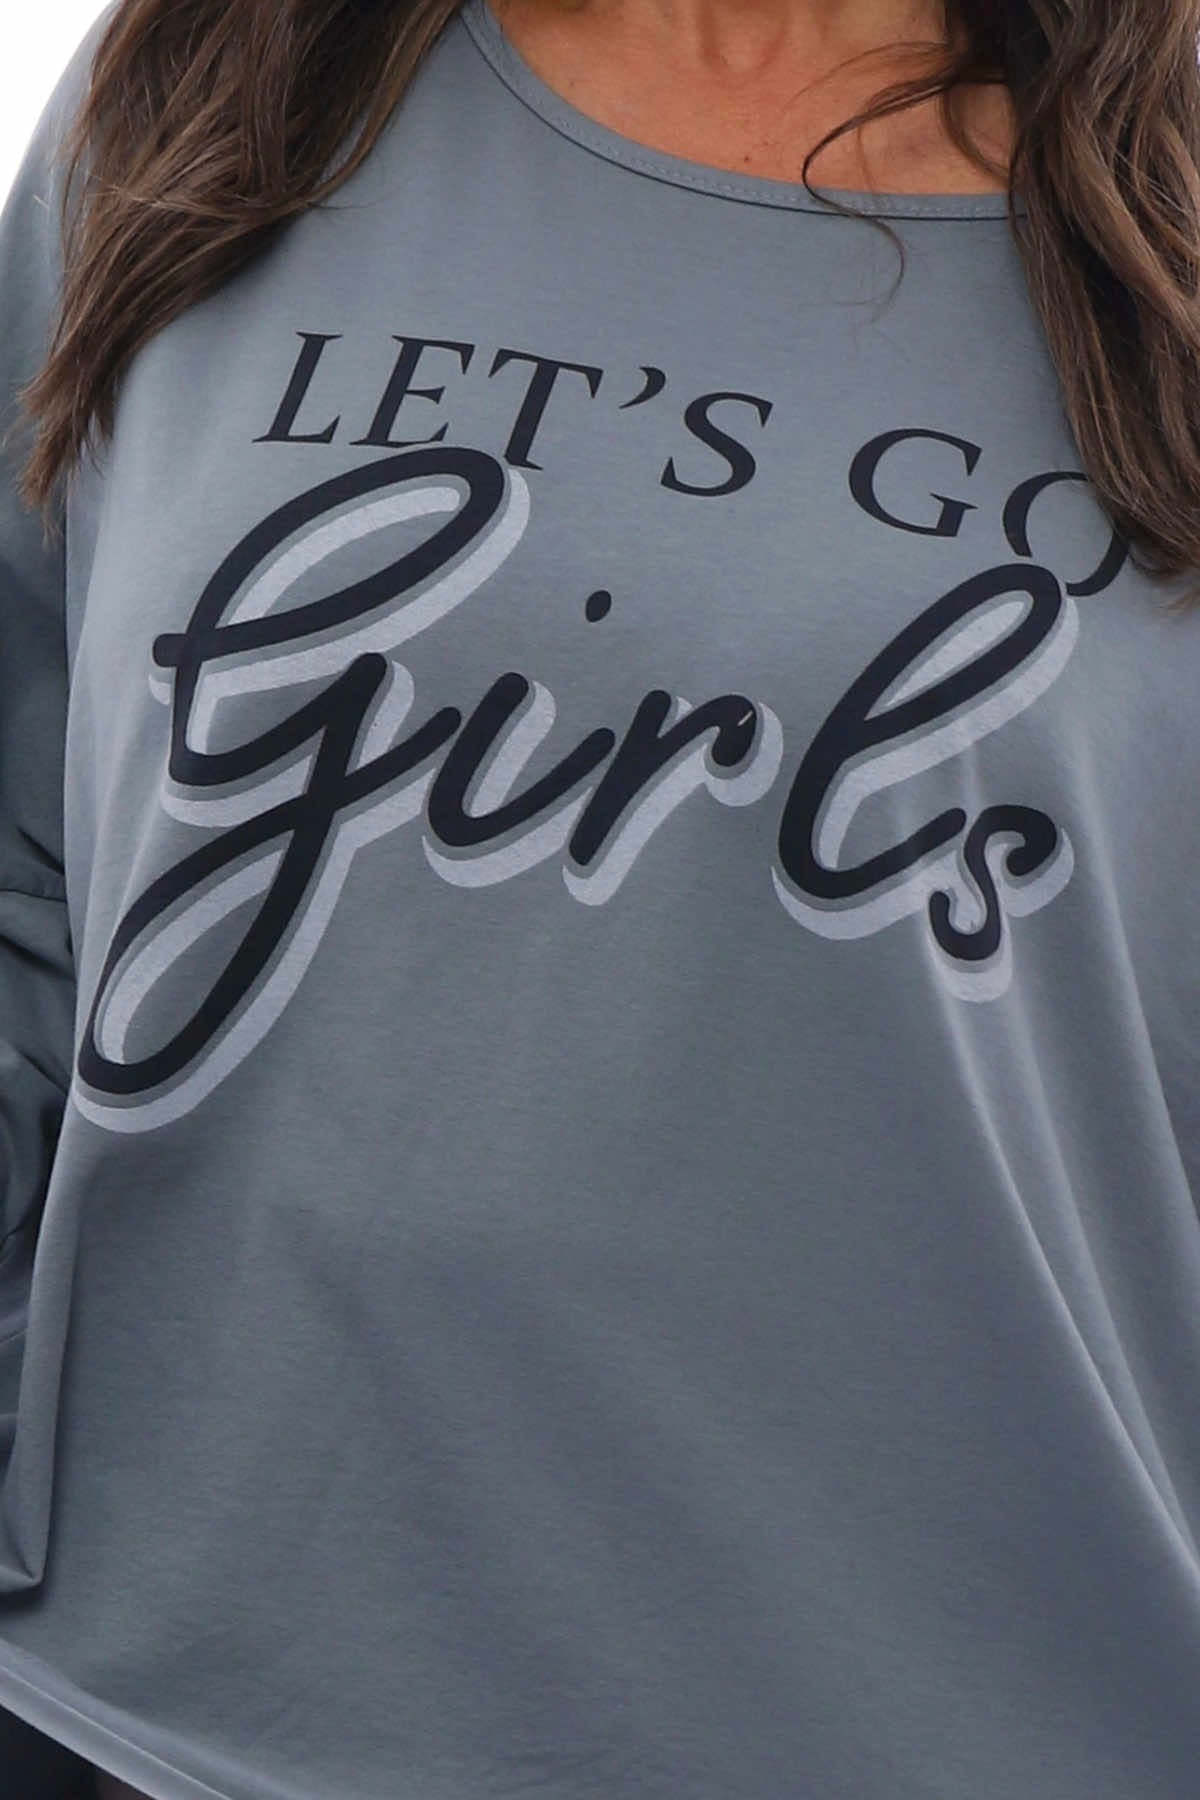 Let's Go Girls Cotton Top Charcoal